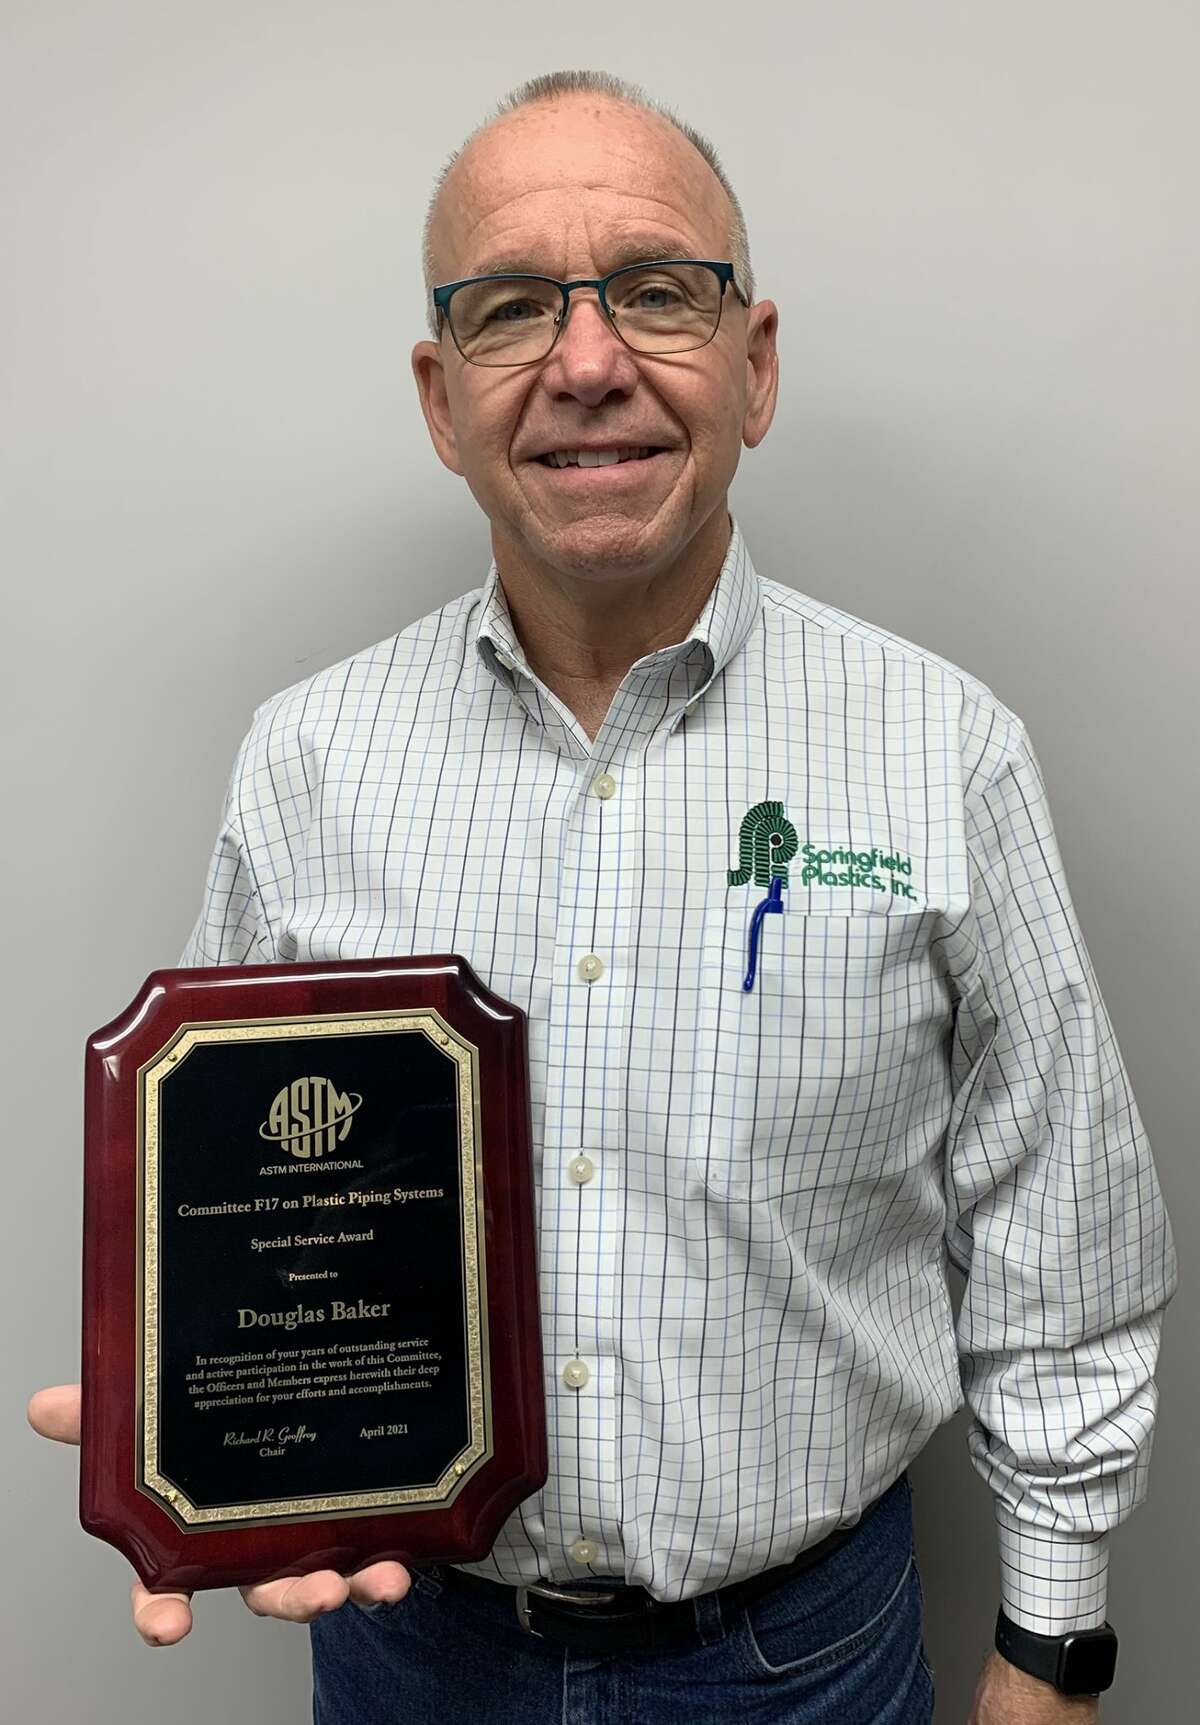 Doug Baker has been honored for his work in improving standards in the plastic piping systems industry.